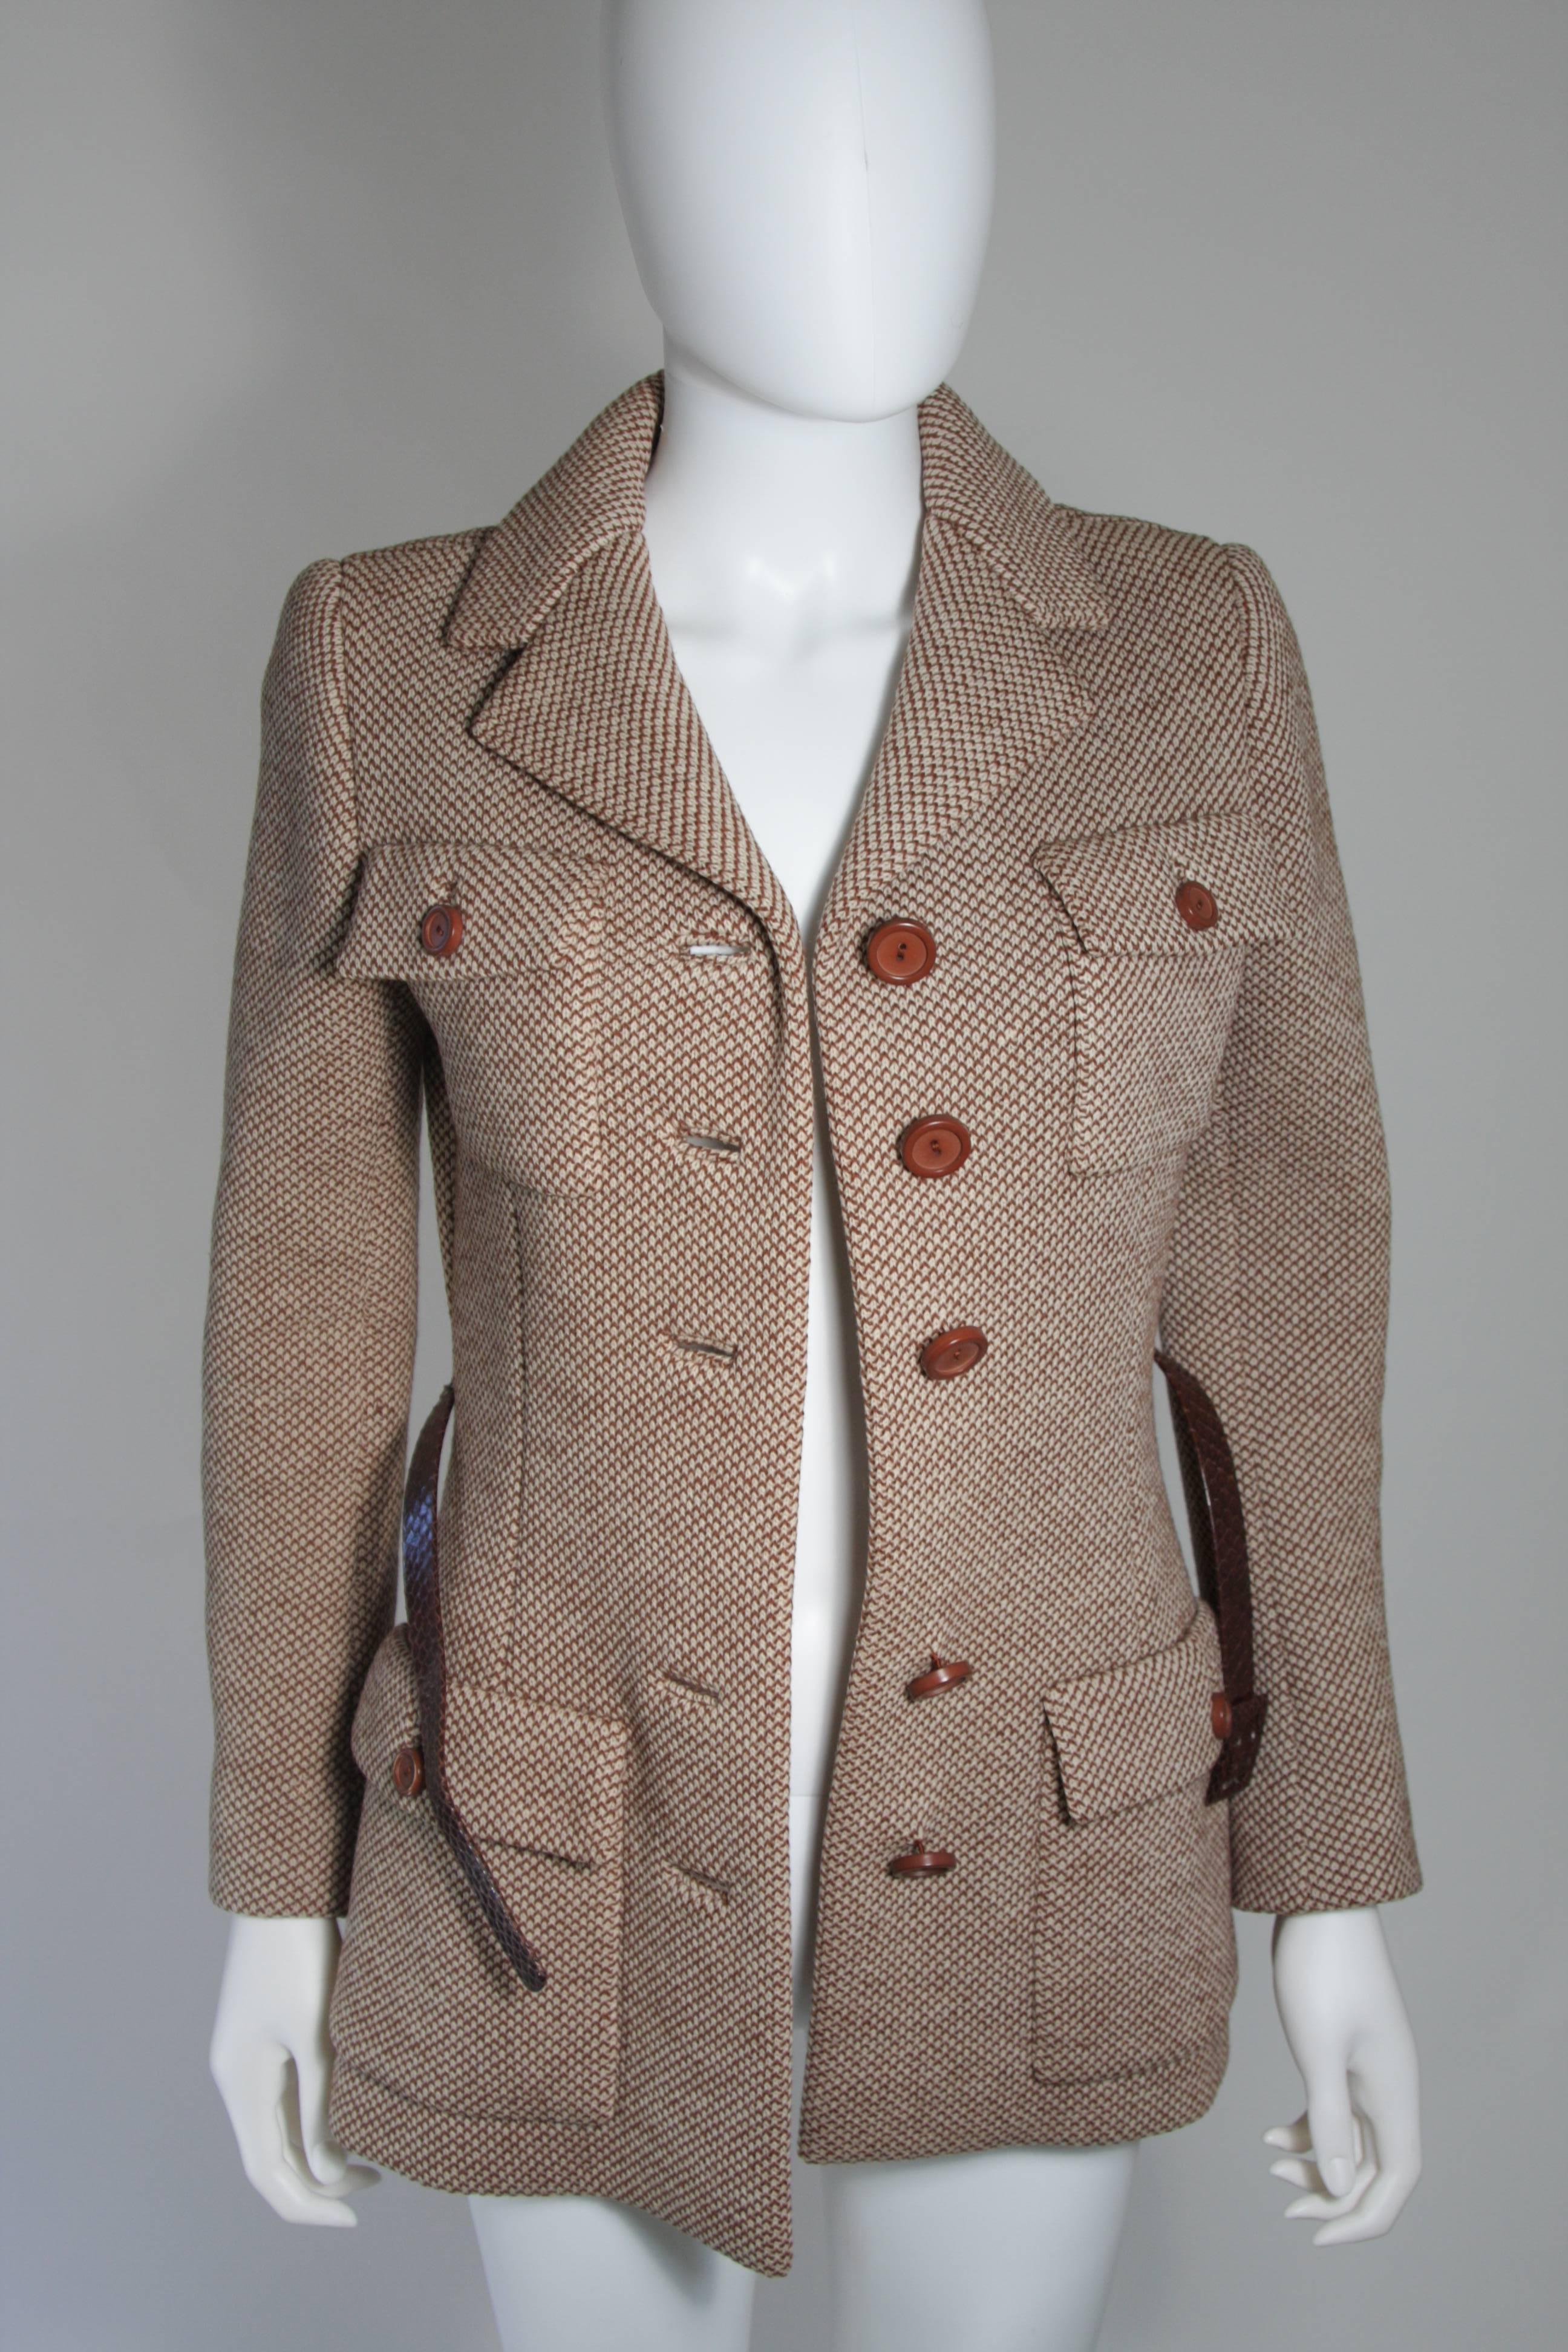 Norell Brown Wool Coat with Brown Snakeskin Belt Size Small Medium 3